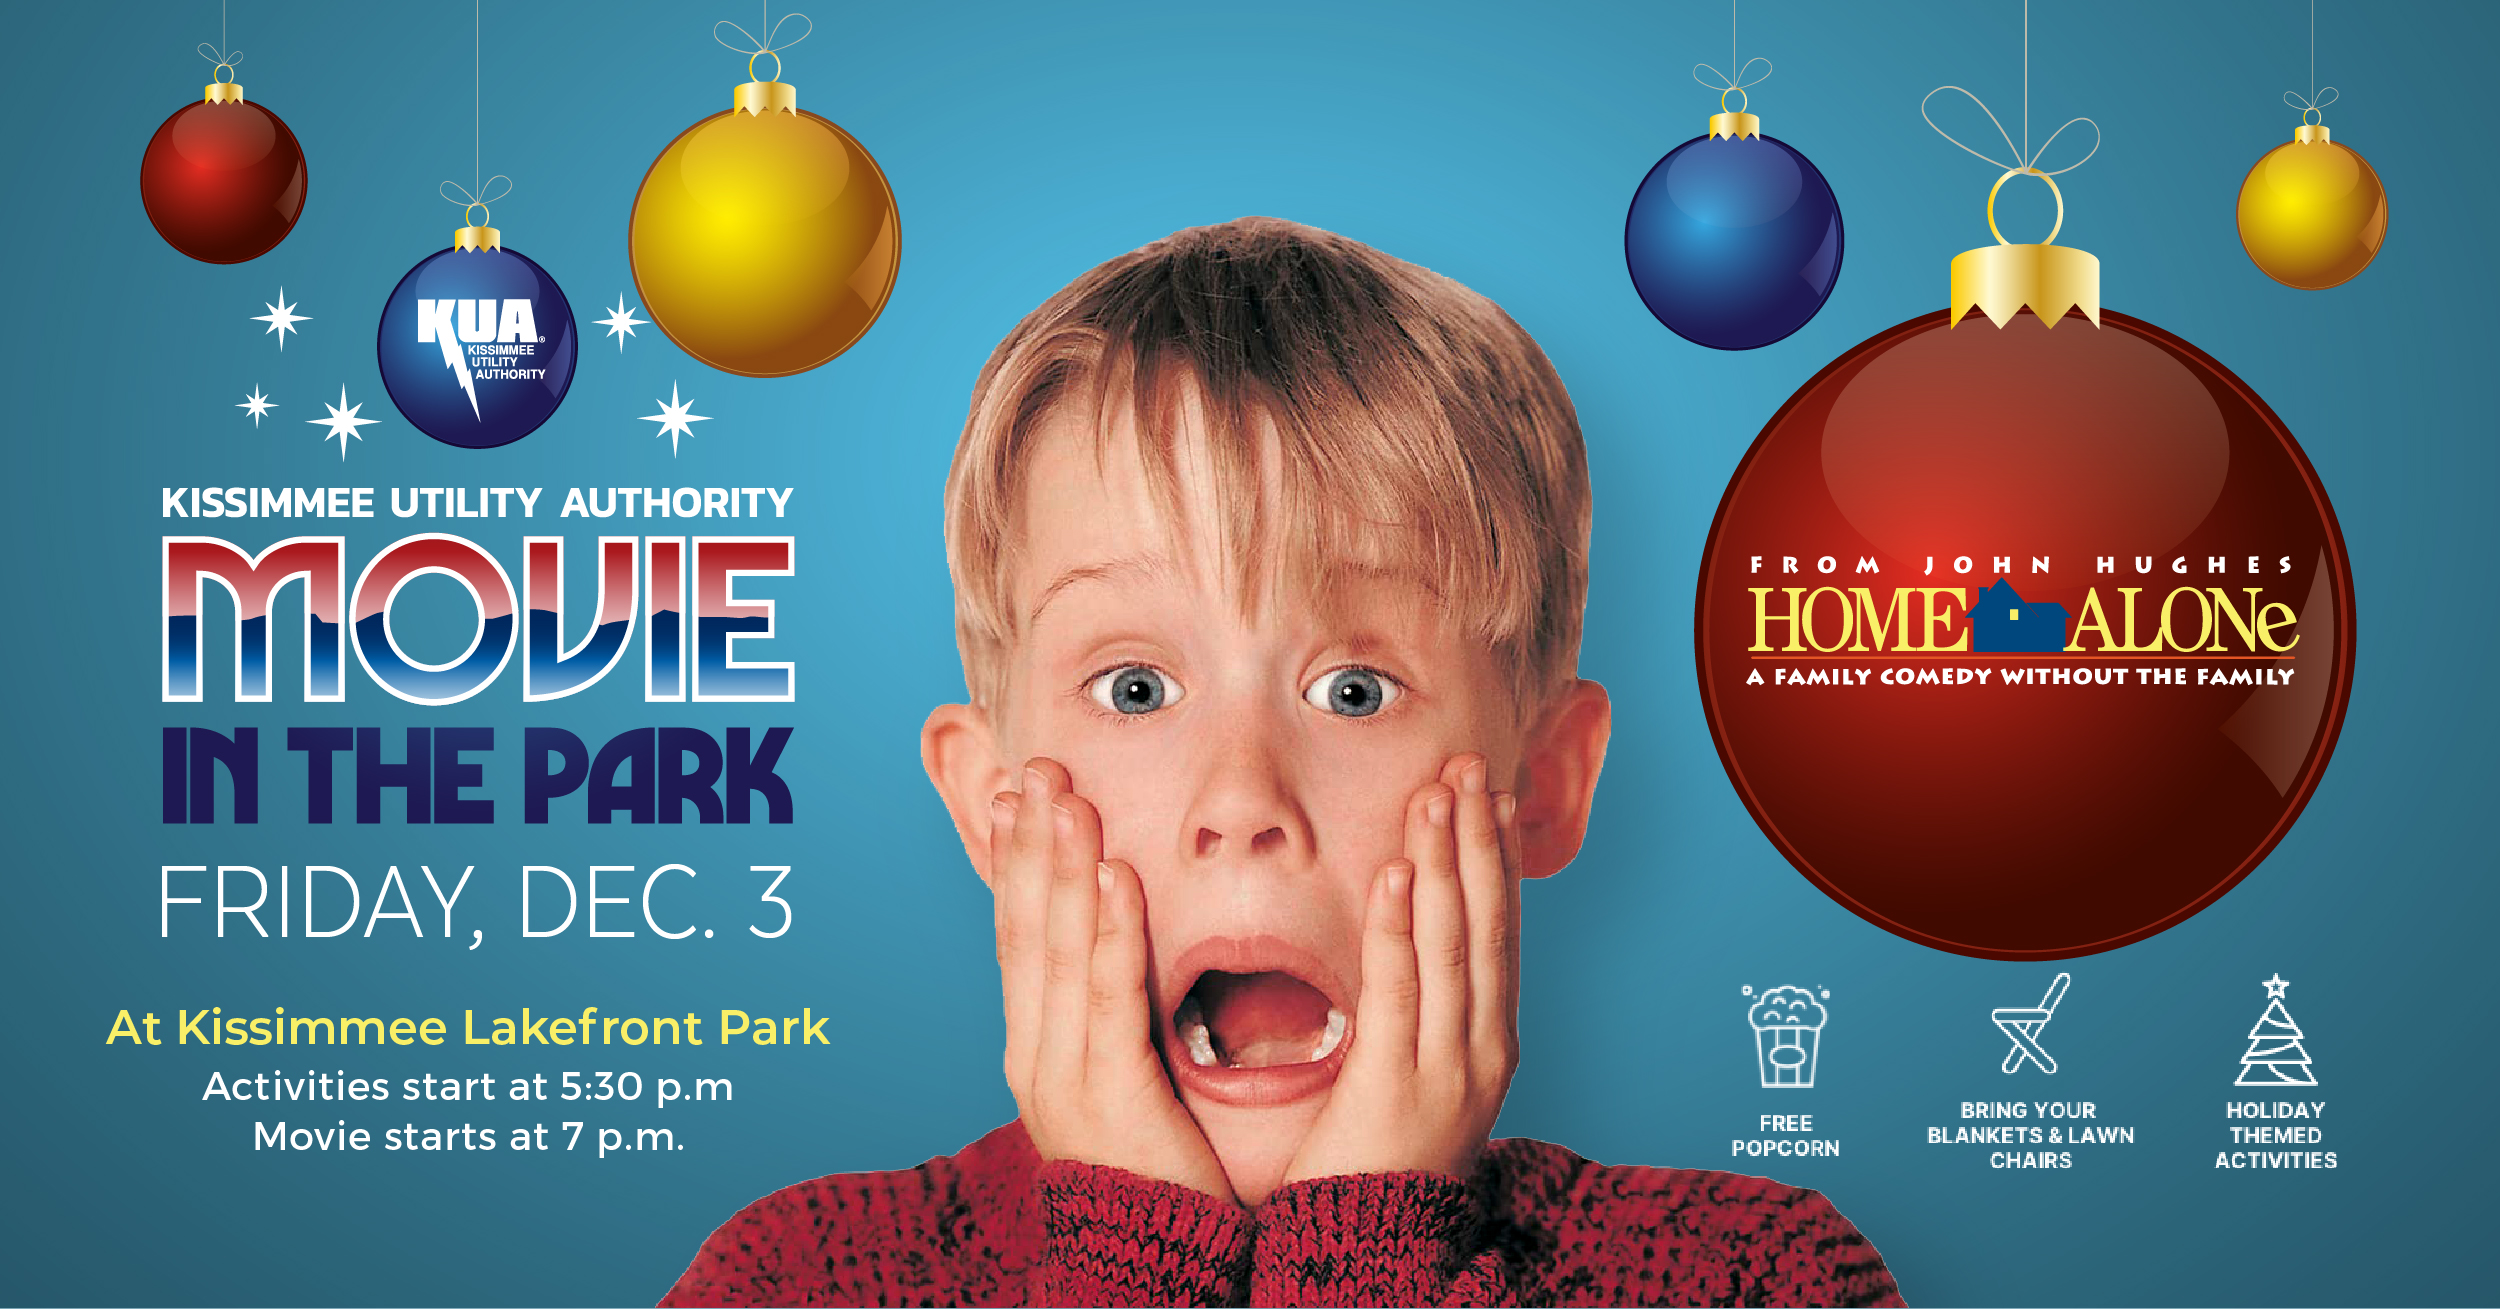 KUA to host free Movie in the Park featuring ‘Home Alone’ Kissimmee